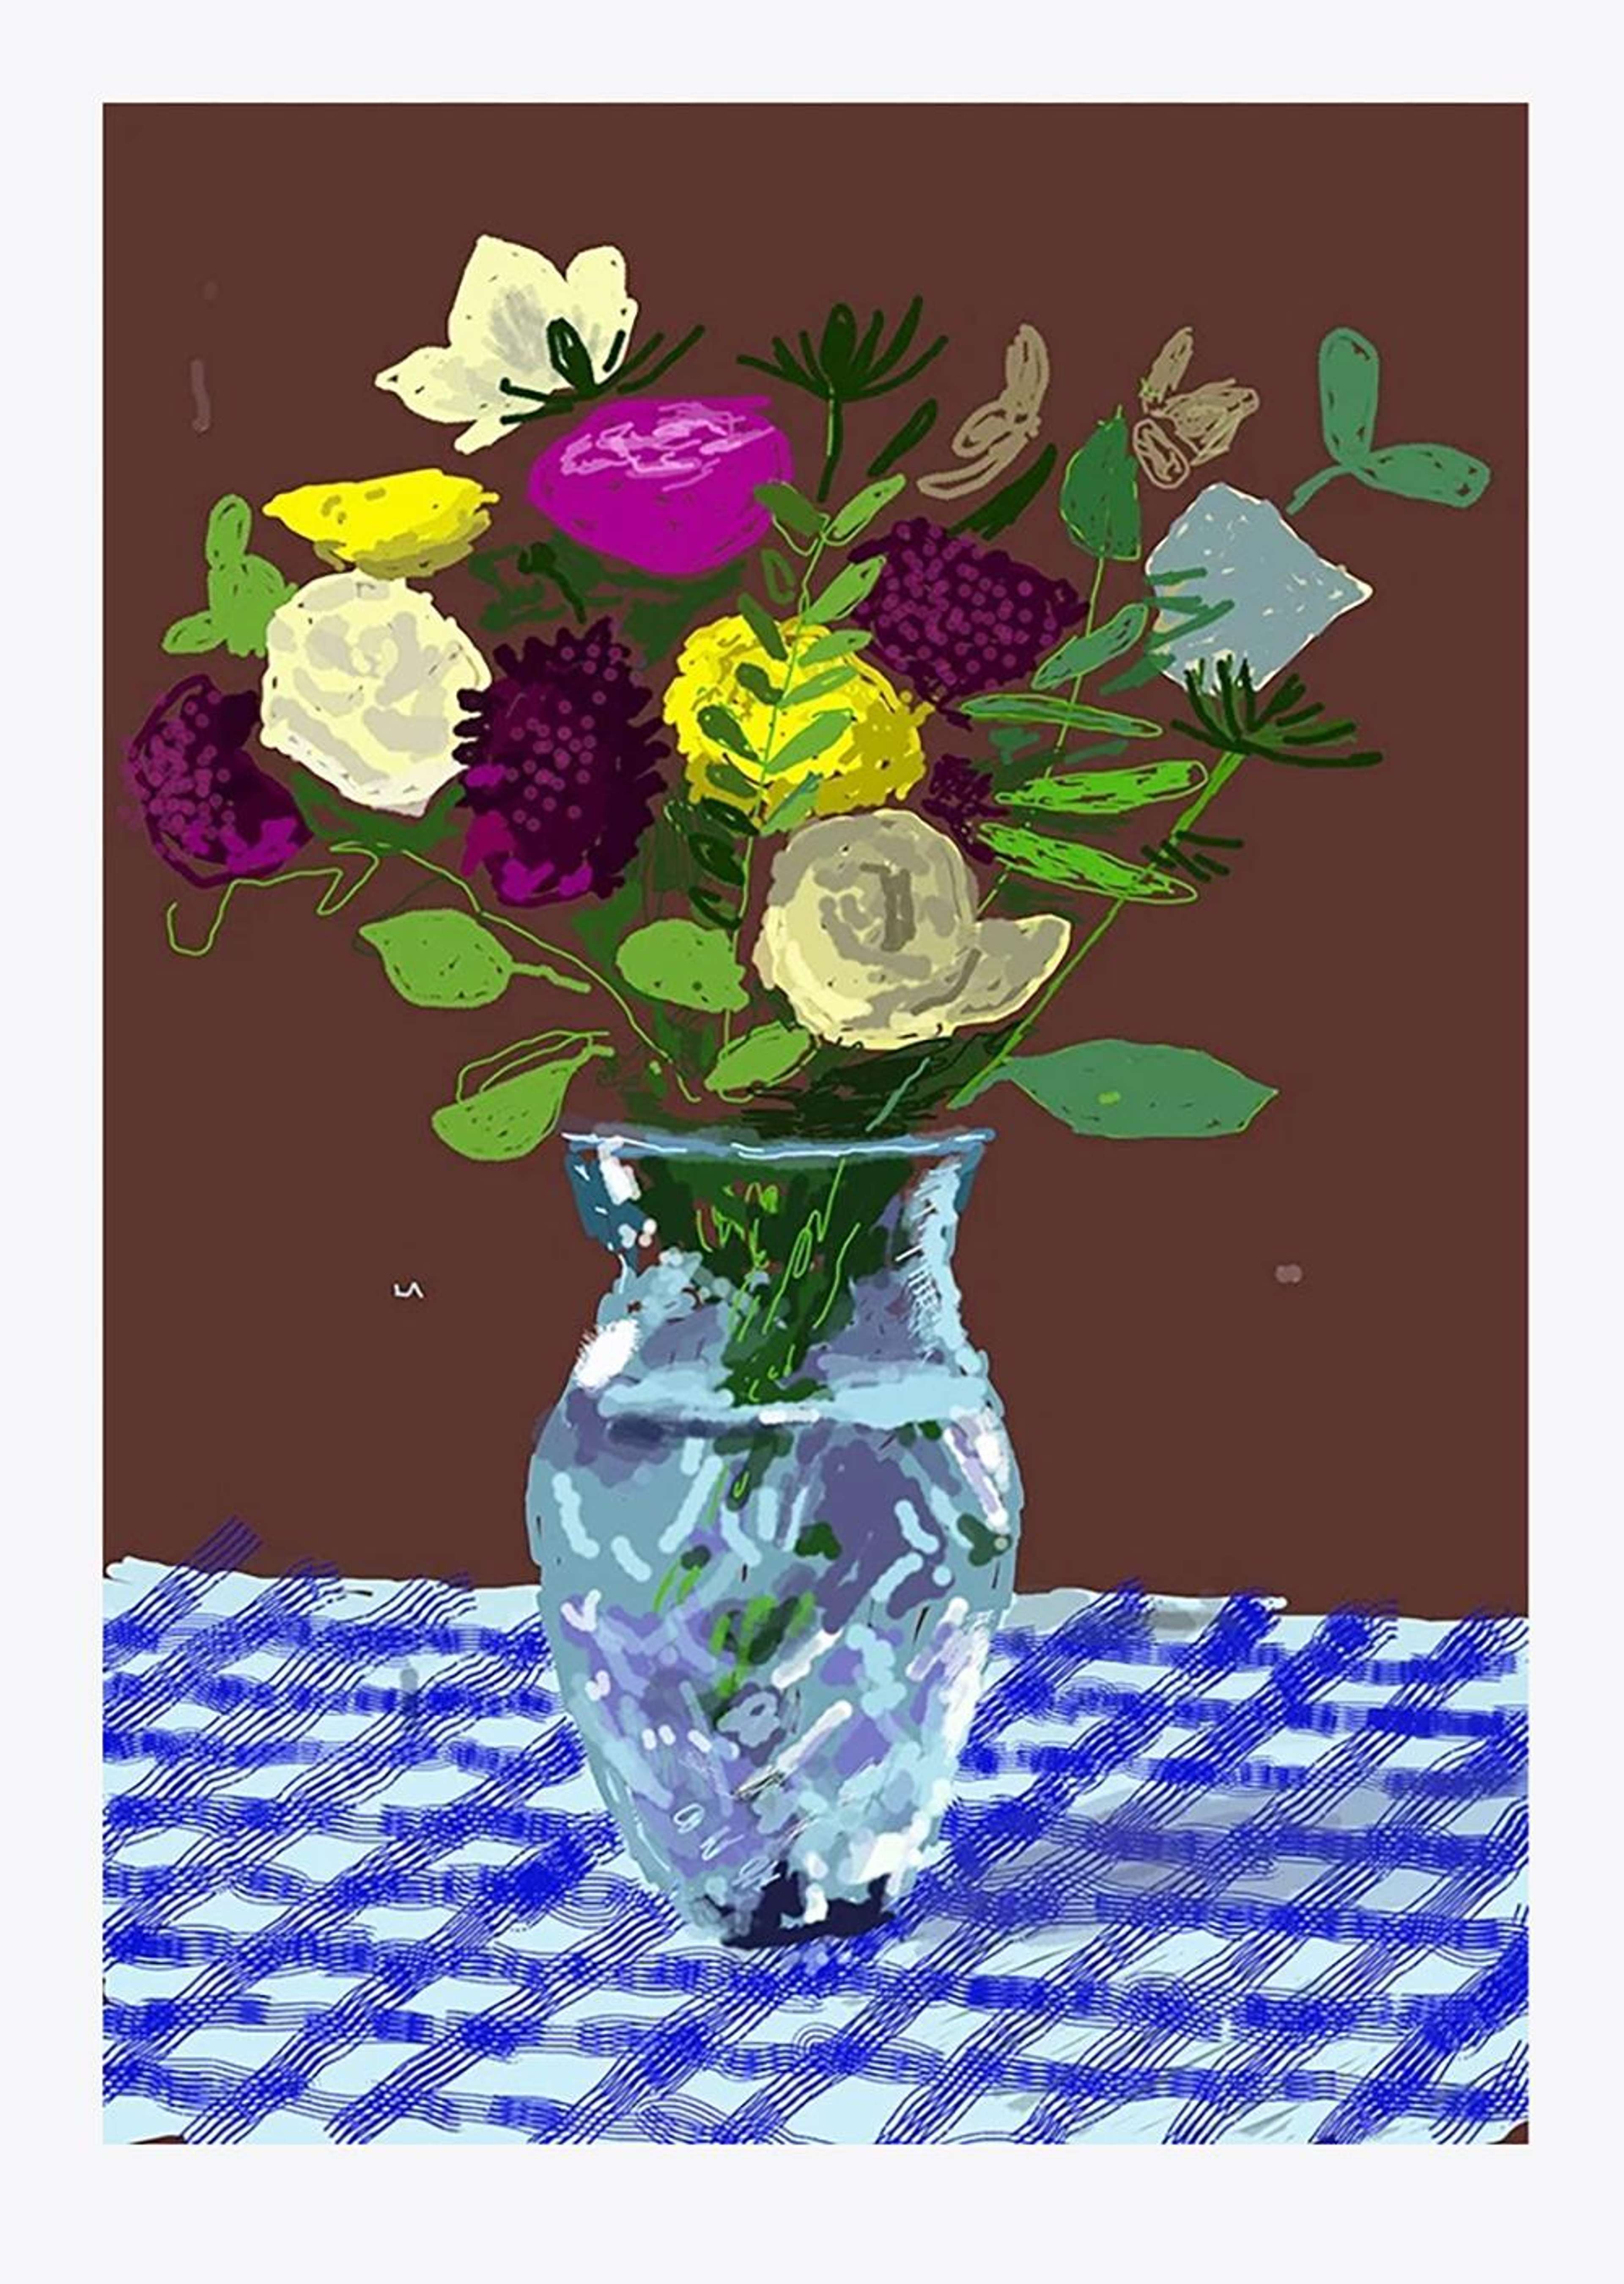 20th March 2021, Flowers, Glass Vase On A Table - Signed Print by David Hockney 2021 - MyArtBroker